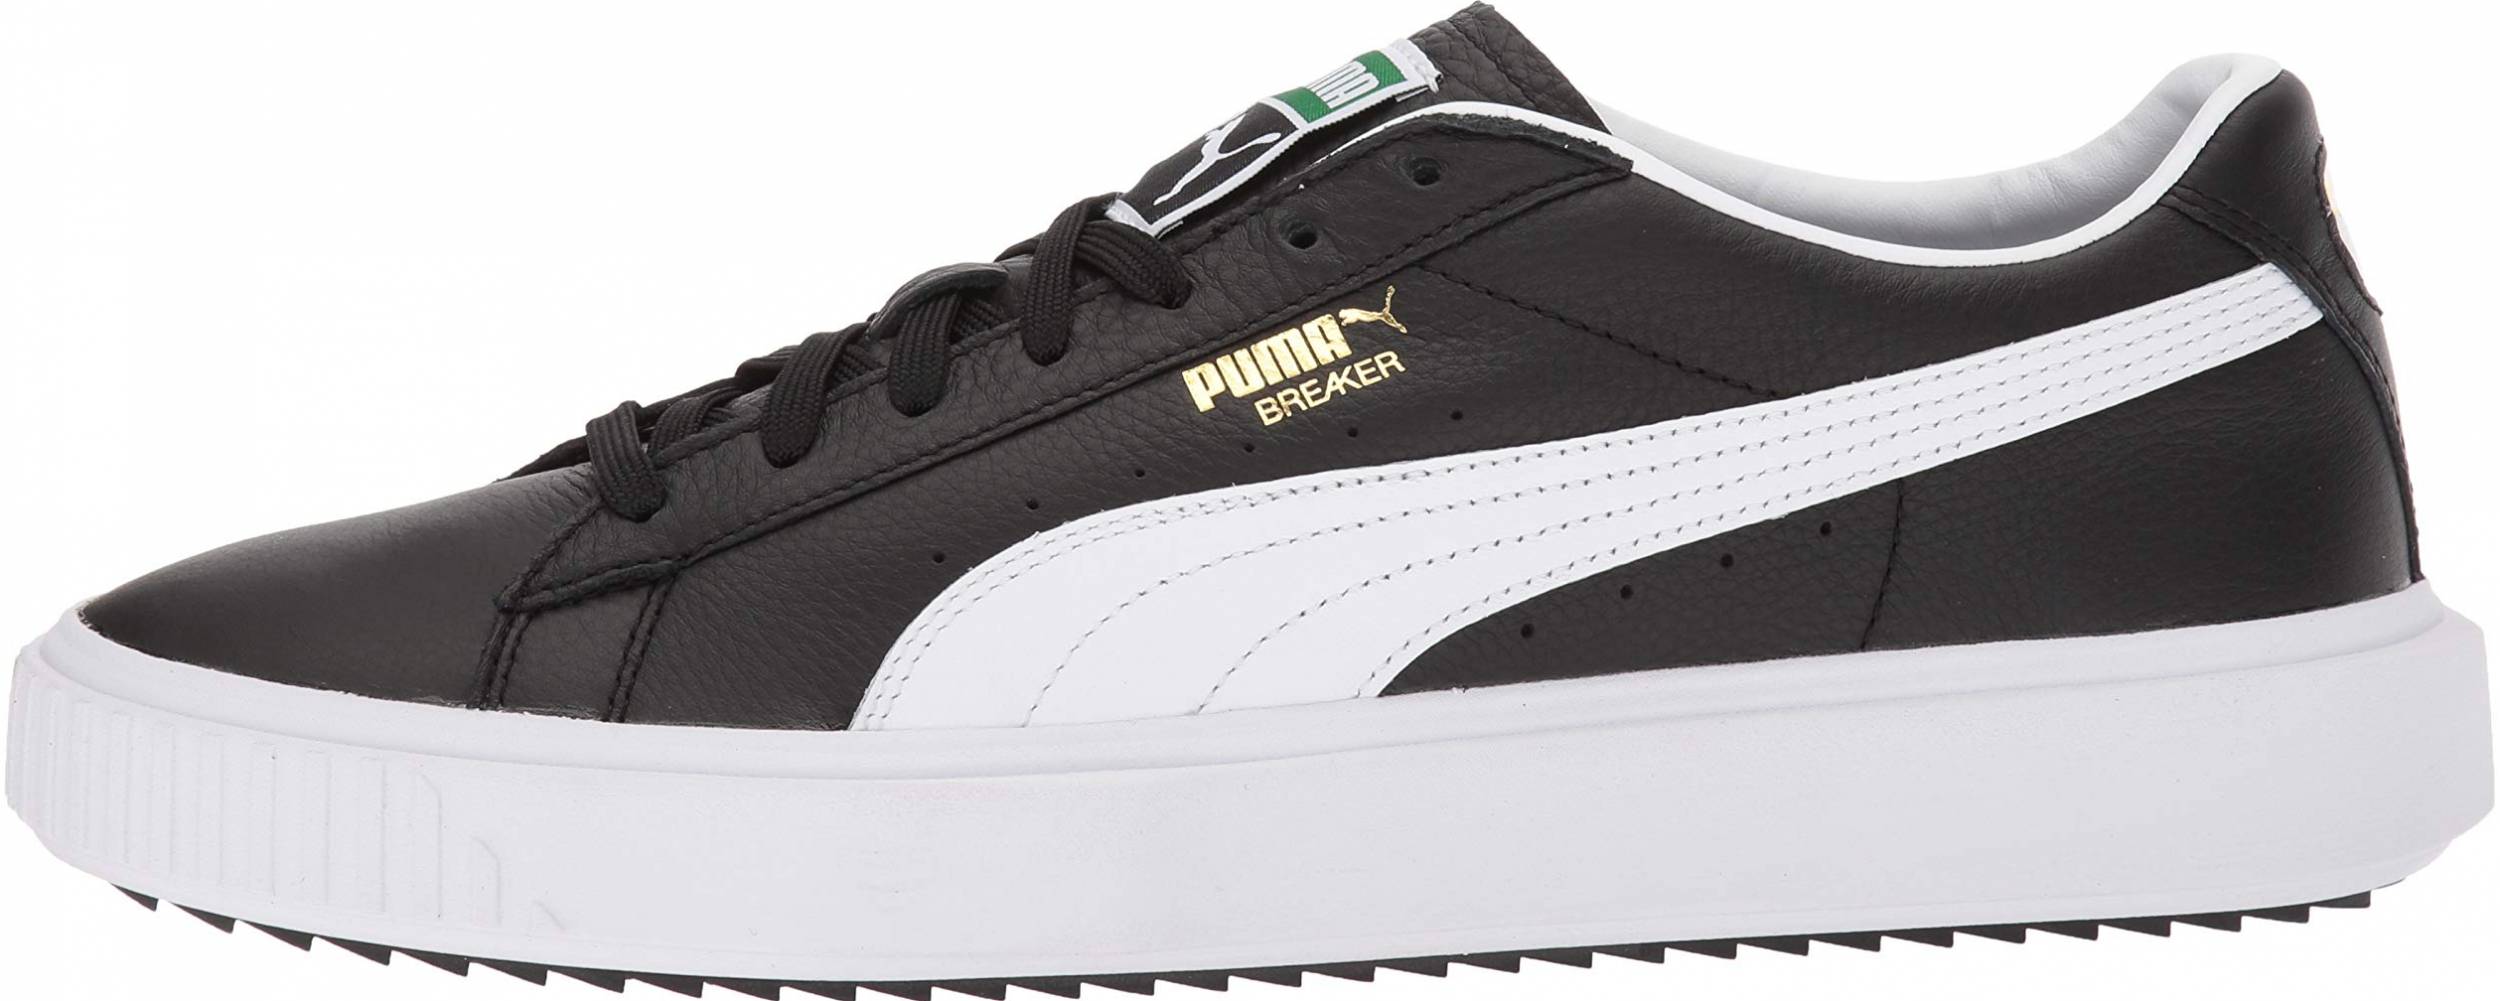 Save 52% on Puma Casual Sneakers (8 